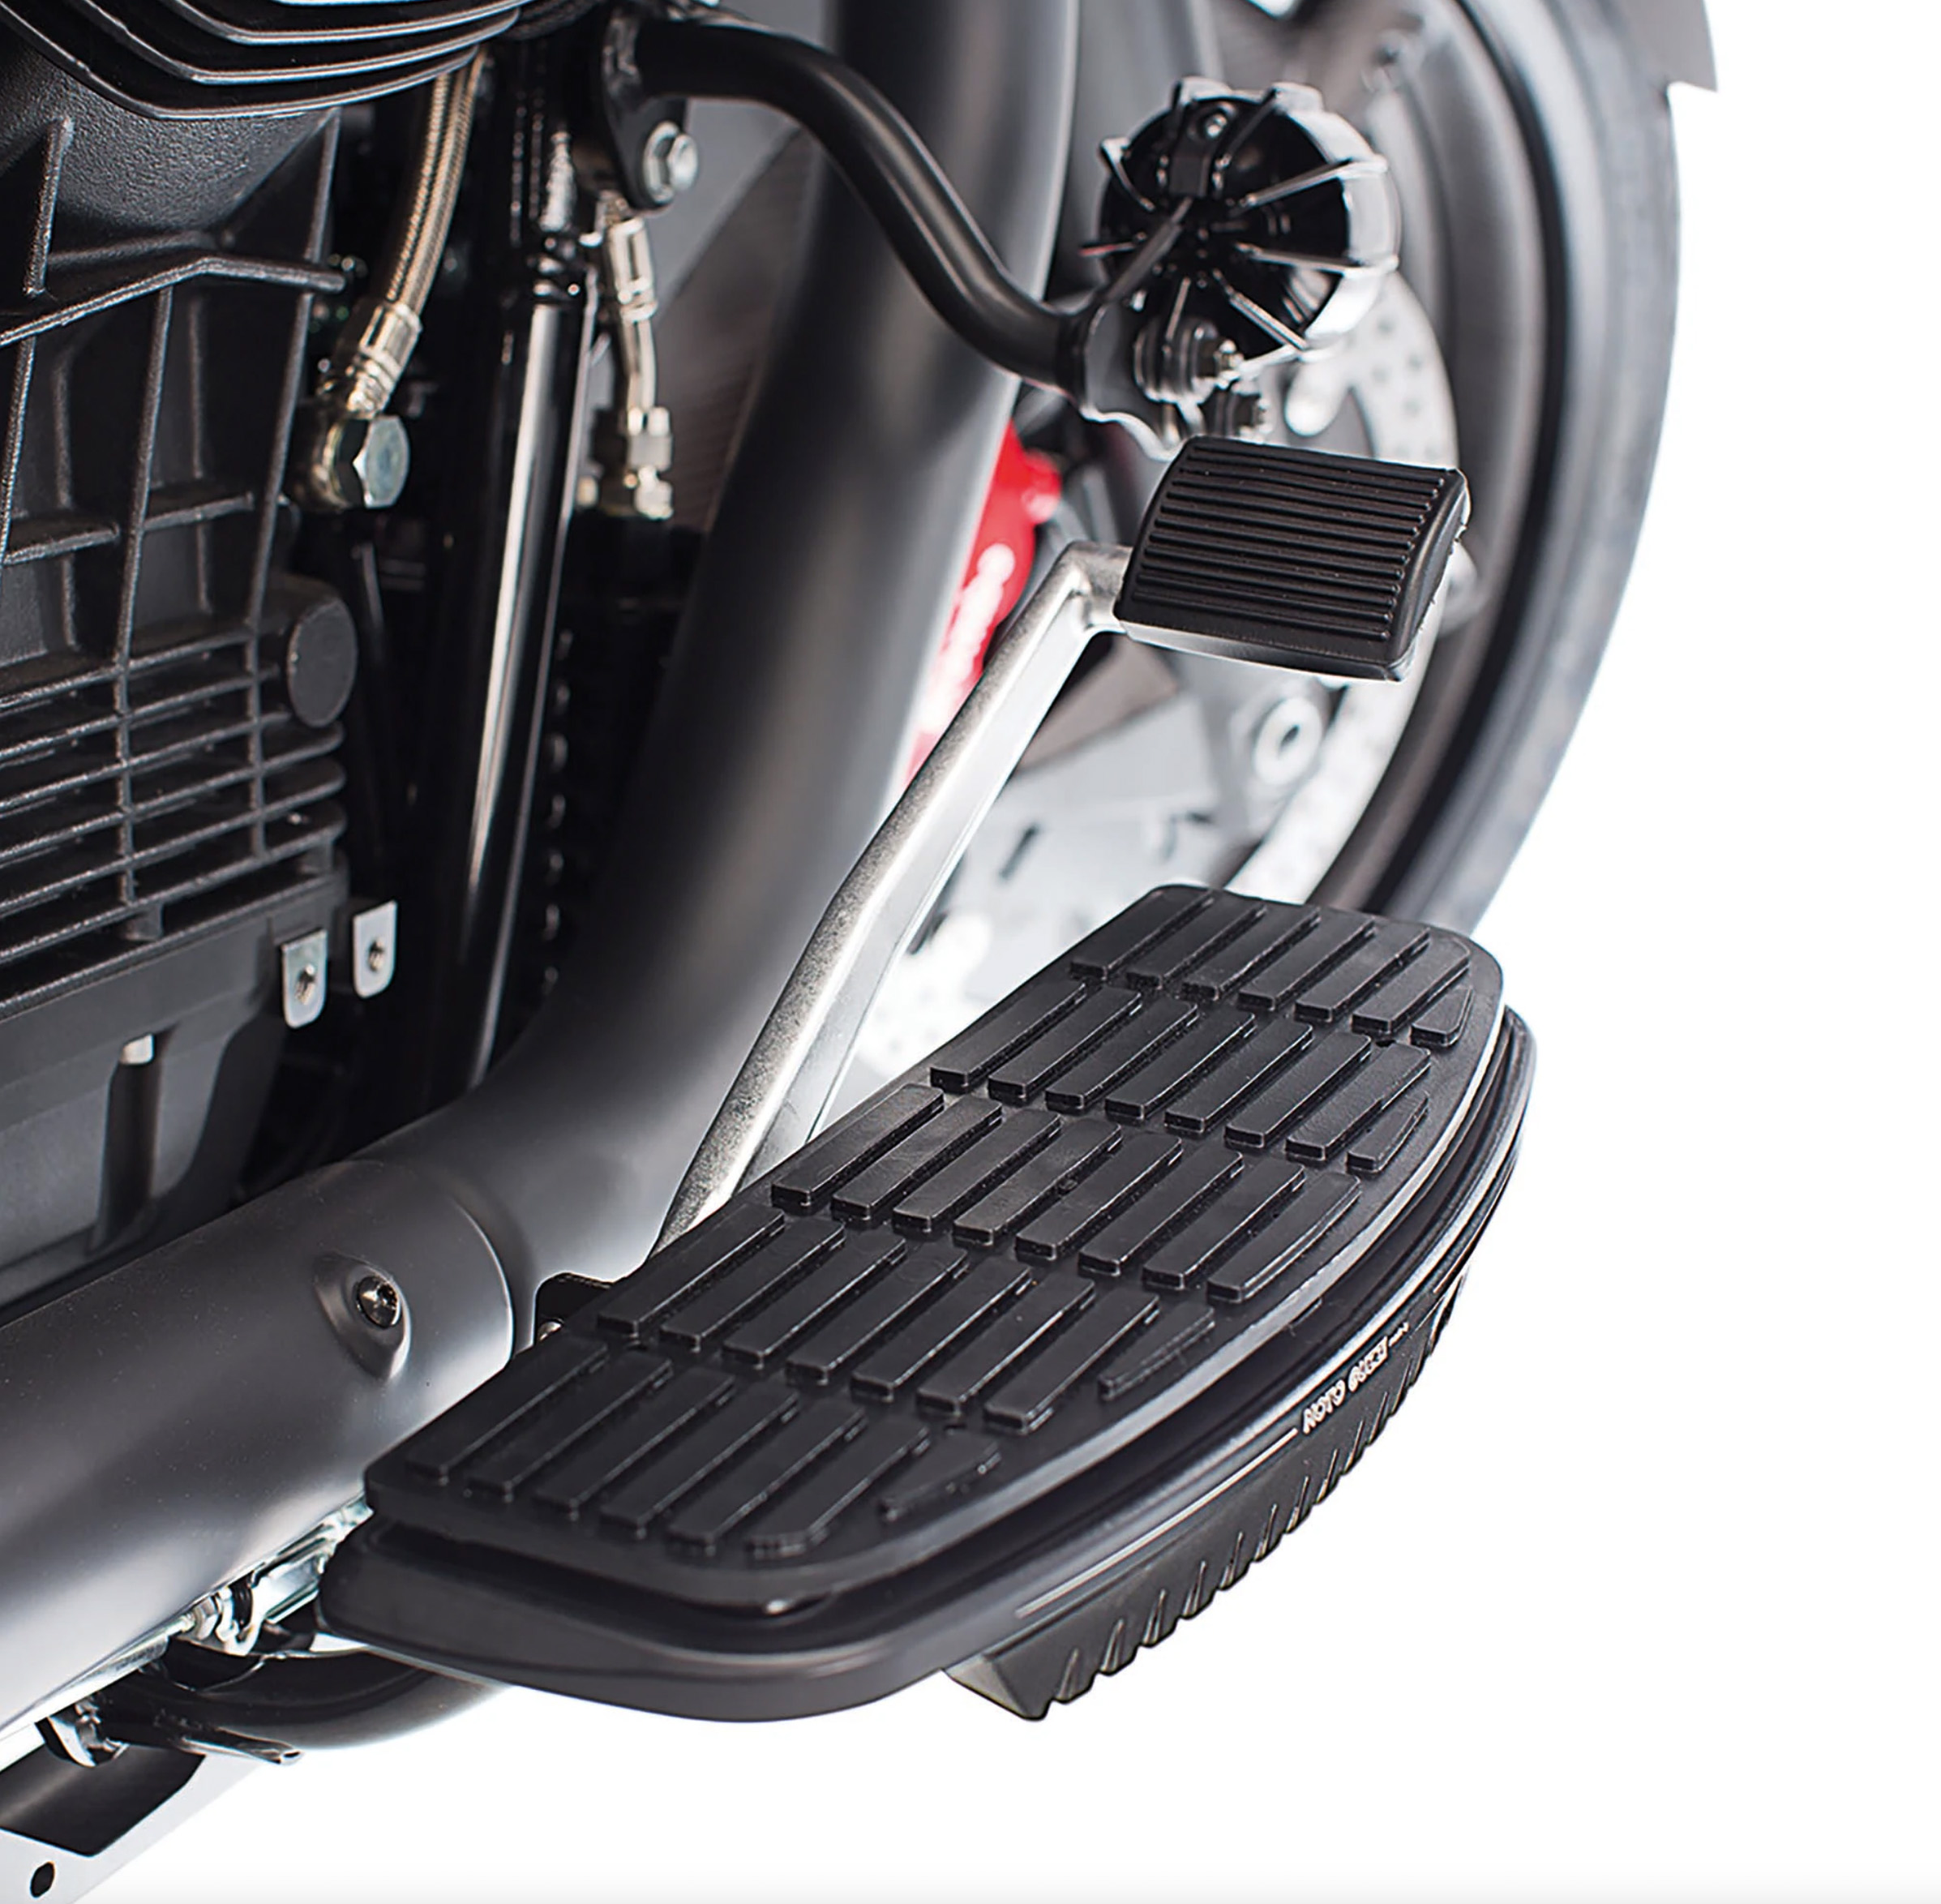 Original running board fairing, aluminum, black for Moto MGX 21/ Audace | RWN-Moto.com | Motorcycle accessories, Motorcycle spare parts, and helmets